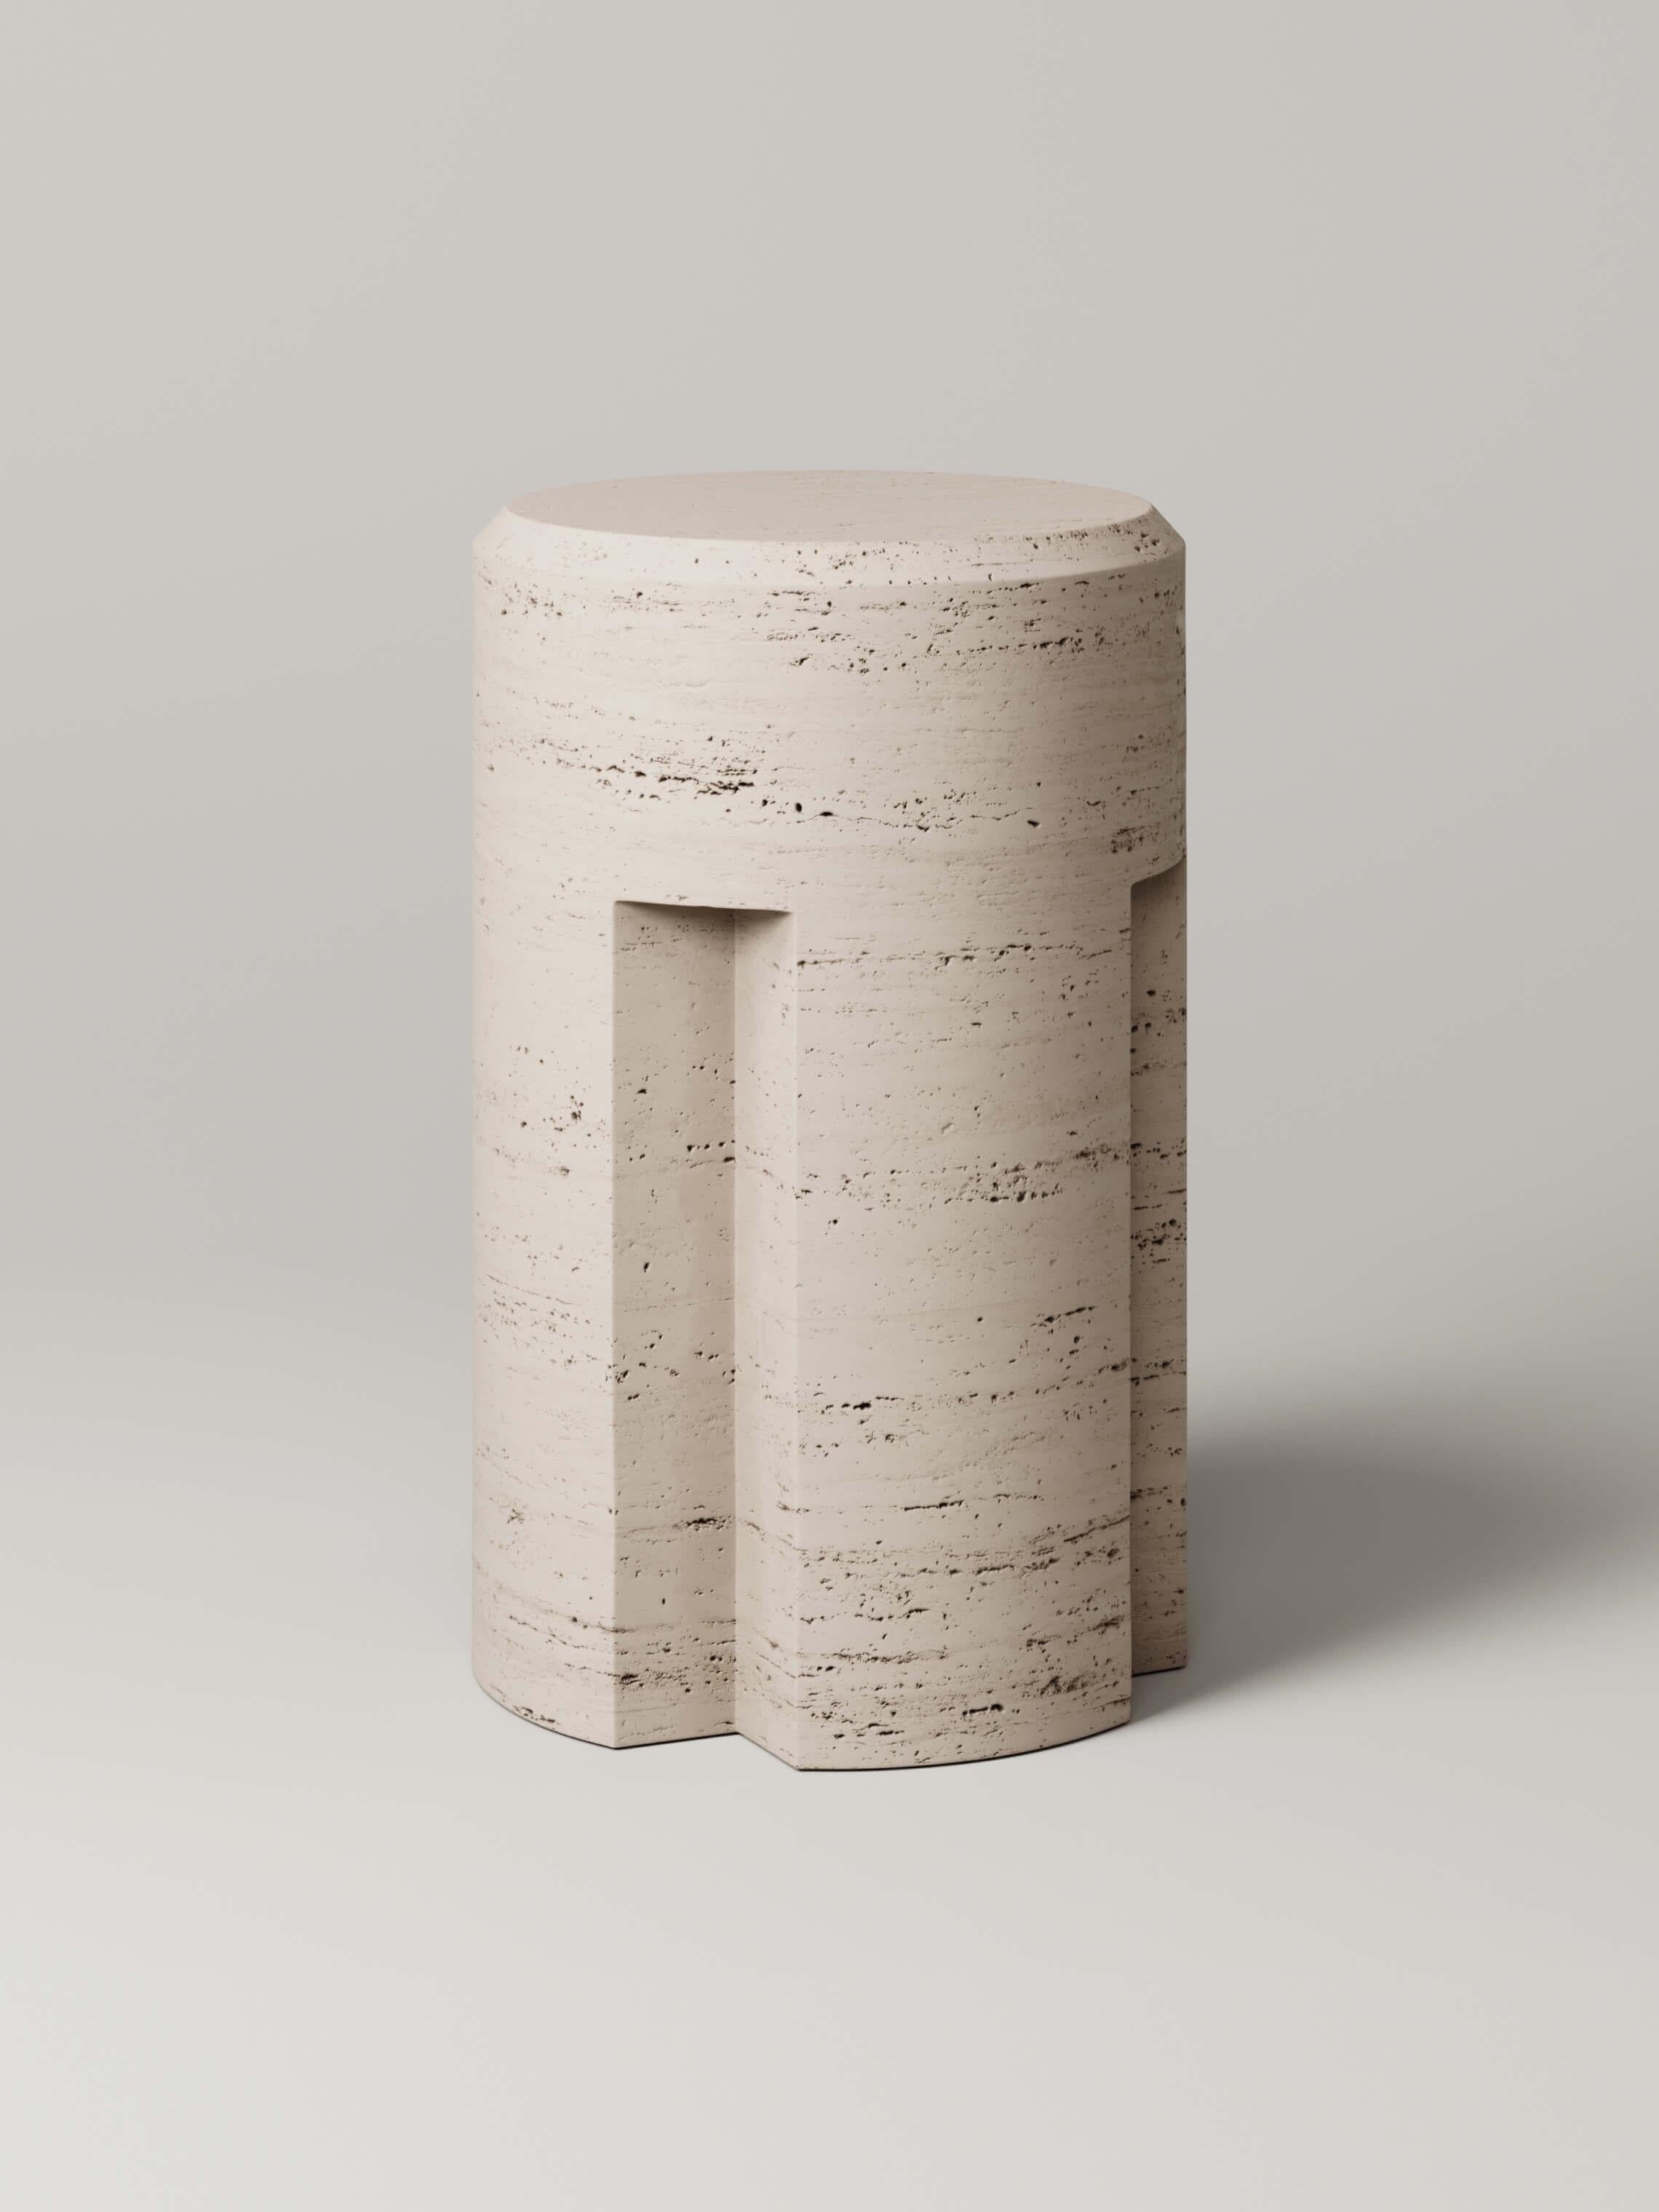 Carved from a single stone, the cylindrical form, sharp cutouts, and gentle sloping bevel of the M_003 Counter Stool blend to create a sophisticated brutalist masterpiece.

Designed by Studio Le Cann exclusively for Monolith Studio
Numbered, Signed,